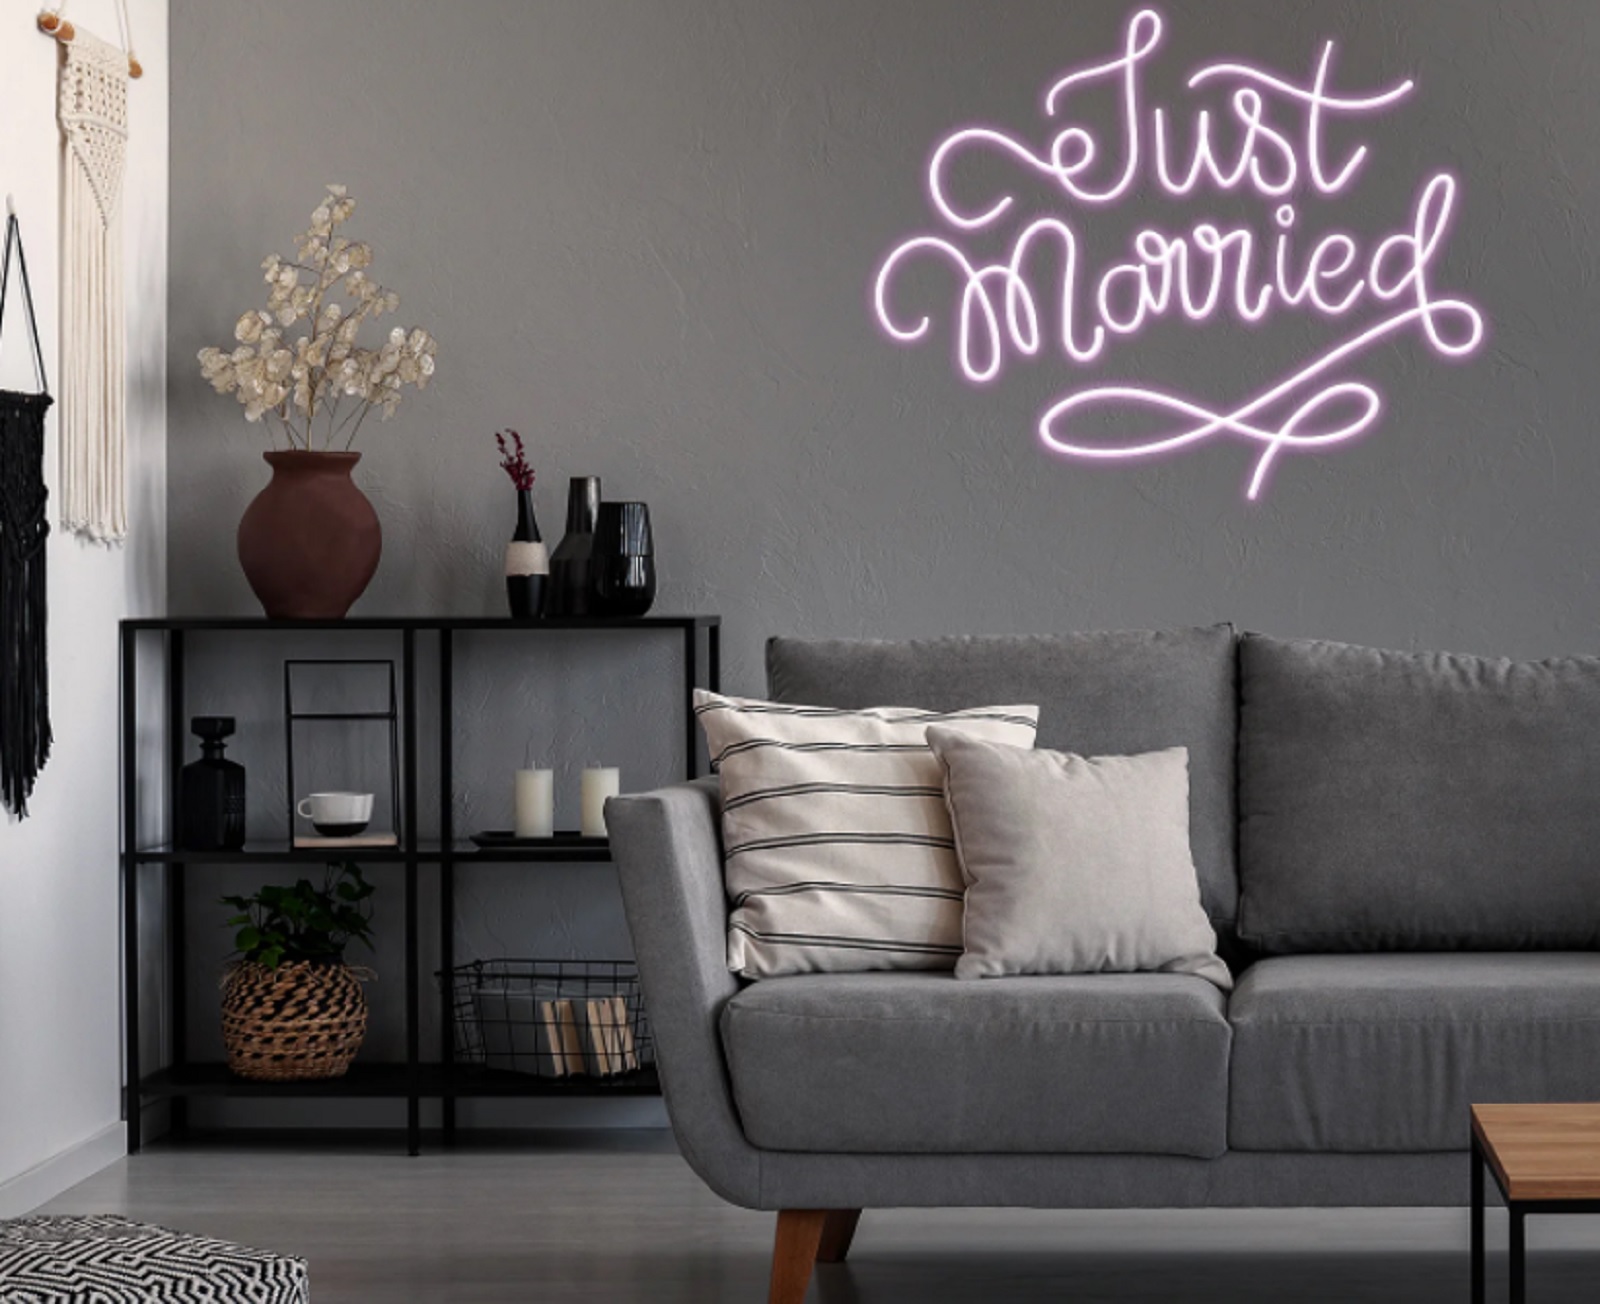 A Neonize wedding neon sign displayed in a living room